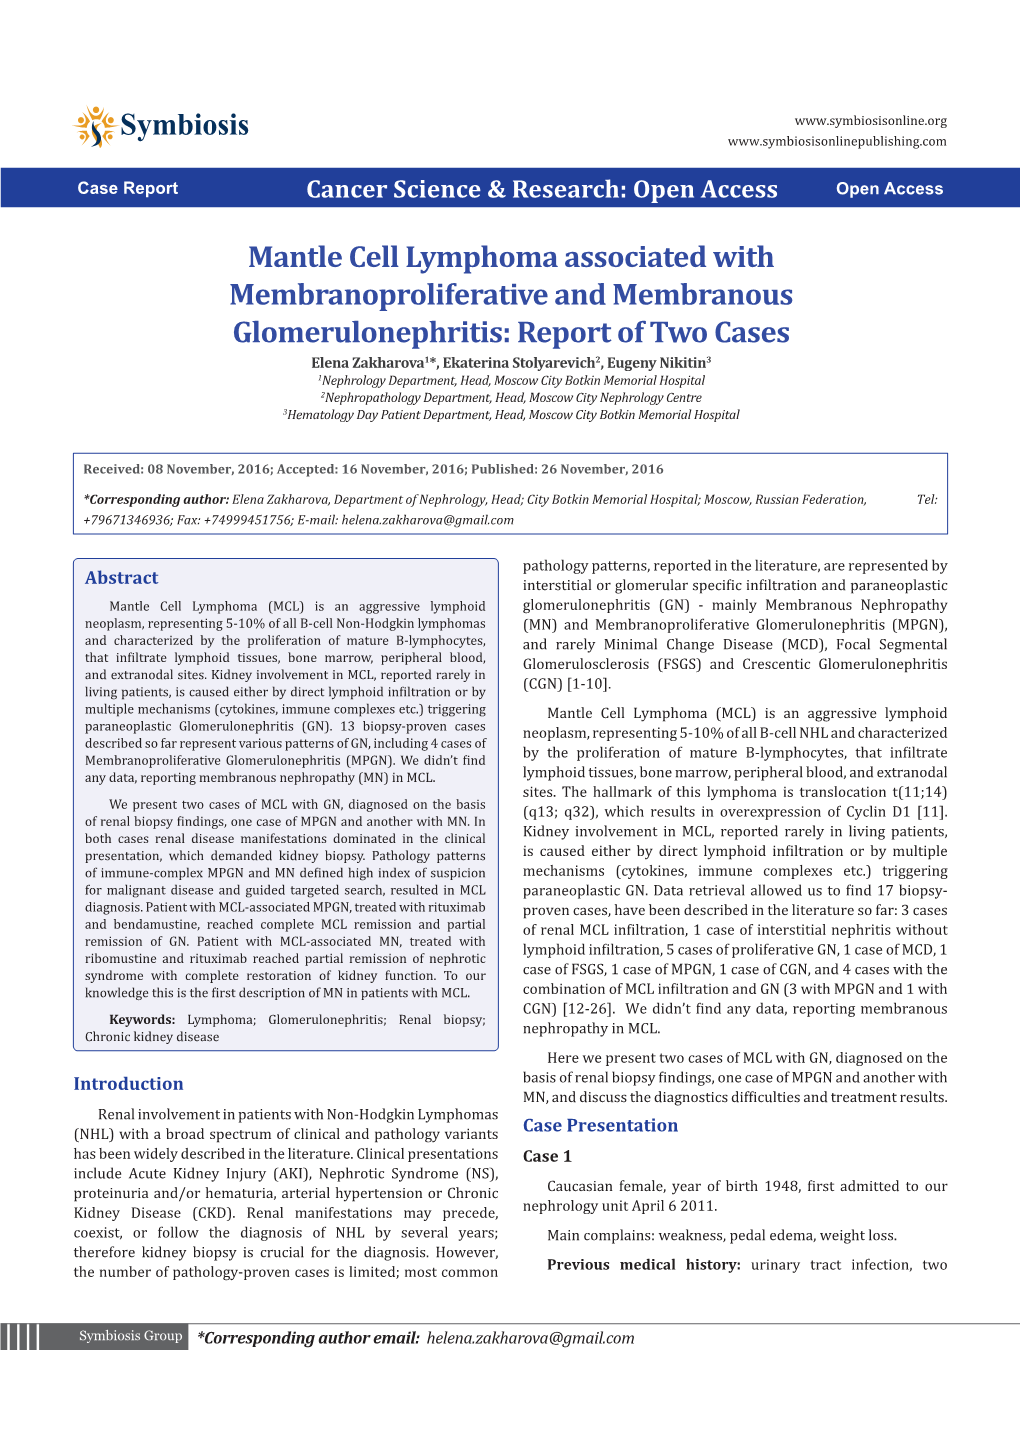 Mantle Cell Lymphoma Associated with Membranoproliferative and Membranous Glomerulonephritis